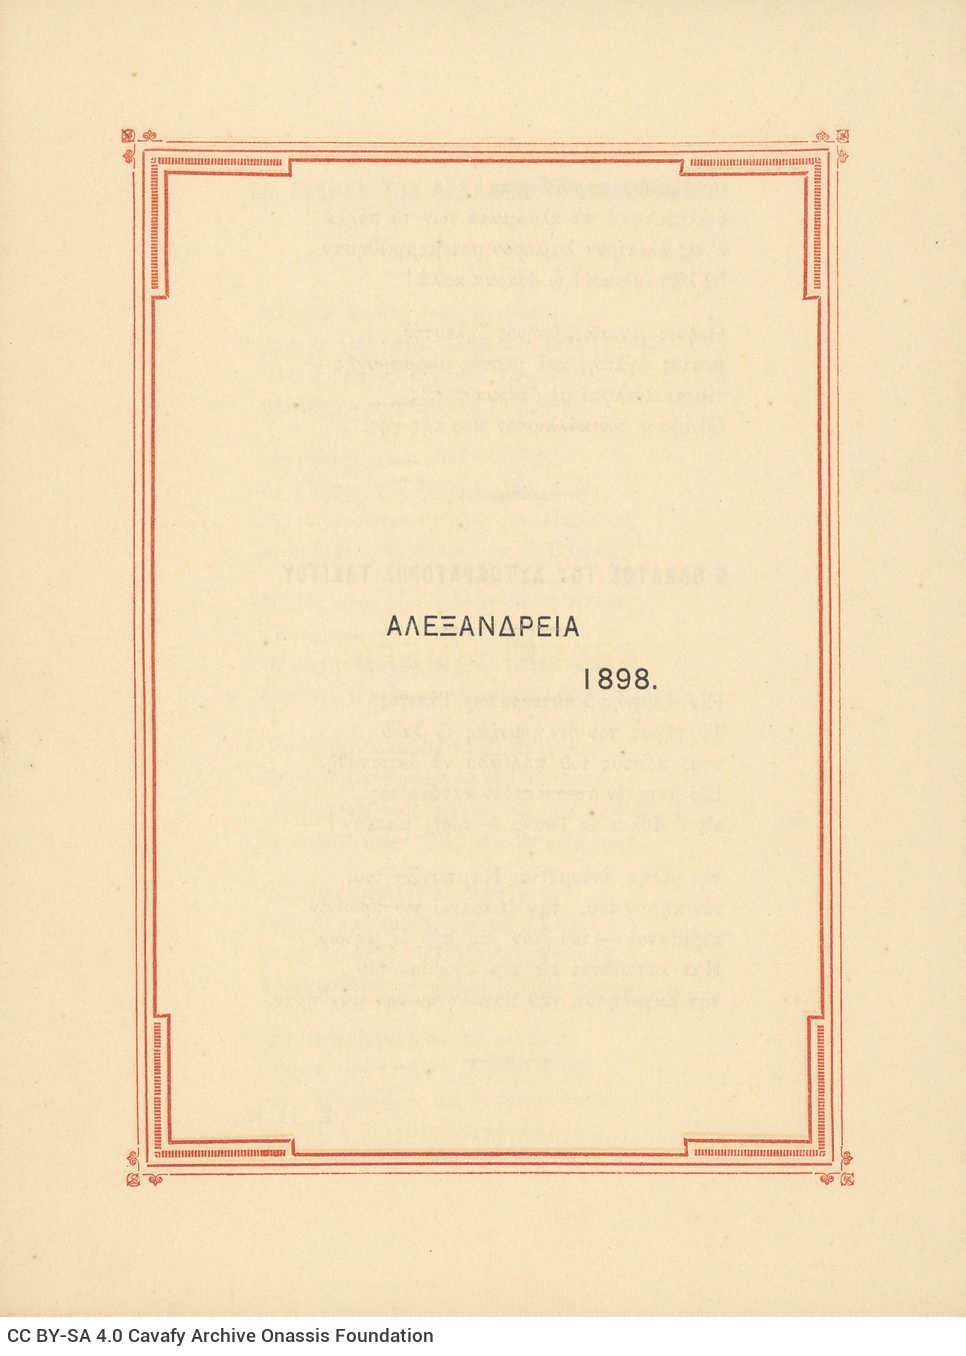 Printed four-page pamphlet. On the first page, the title "Ancient Days" inside a border. On the second and third pages, the p